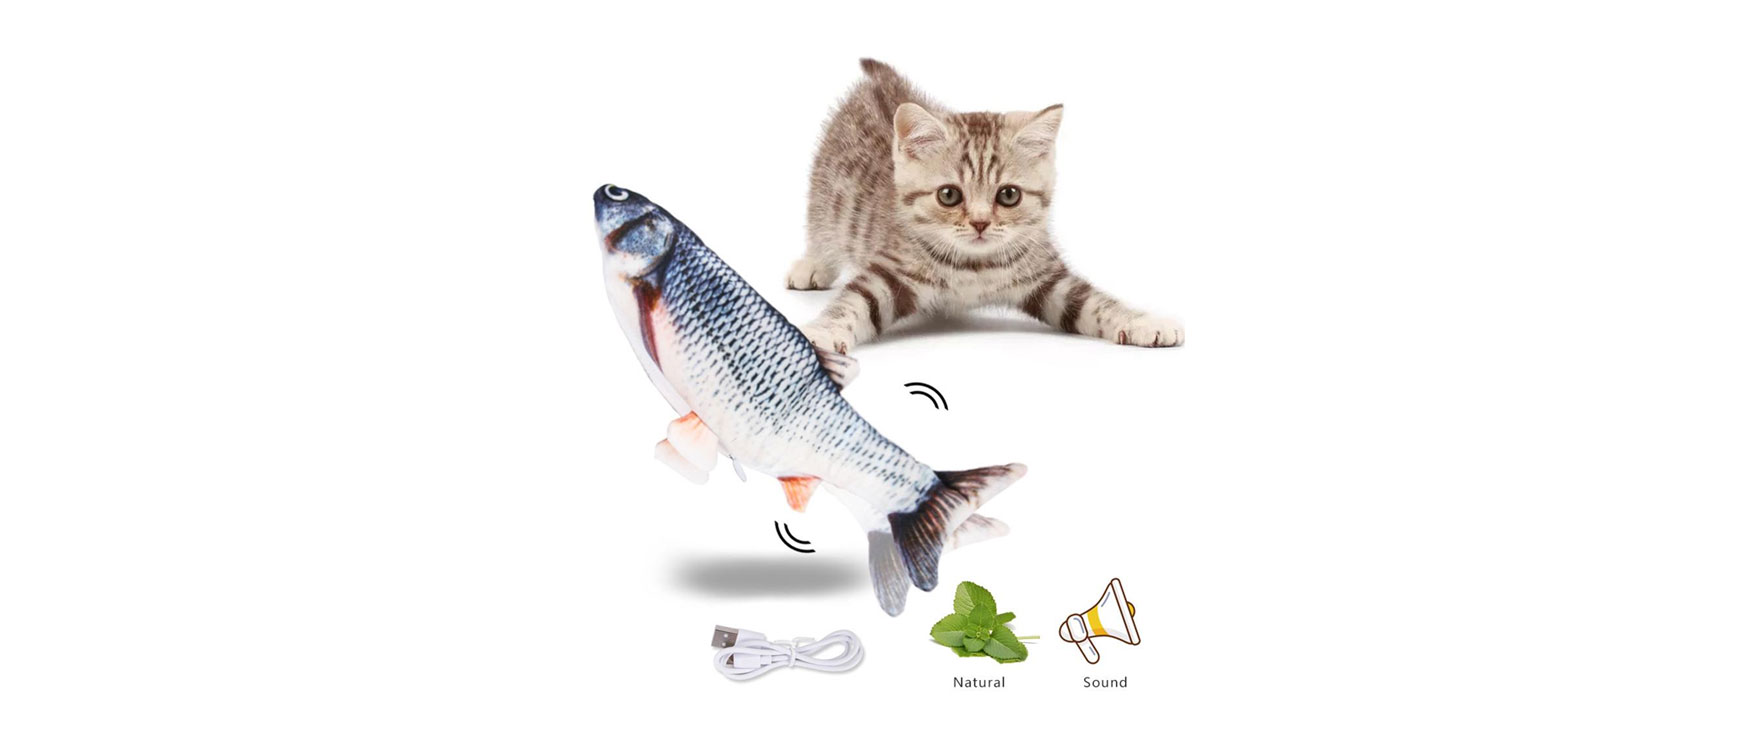 2. Electric Moving Interactive Fish Toy